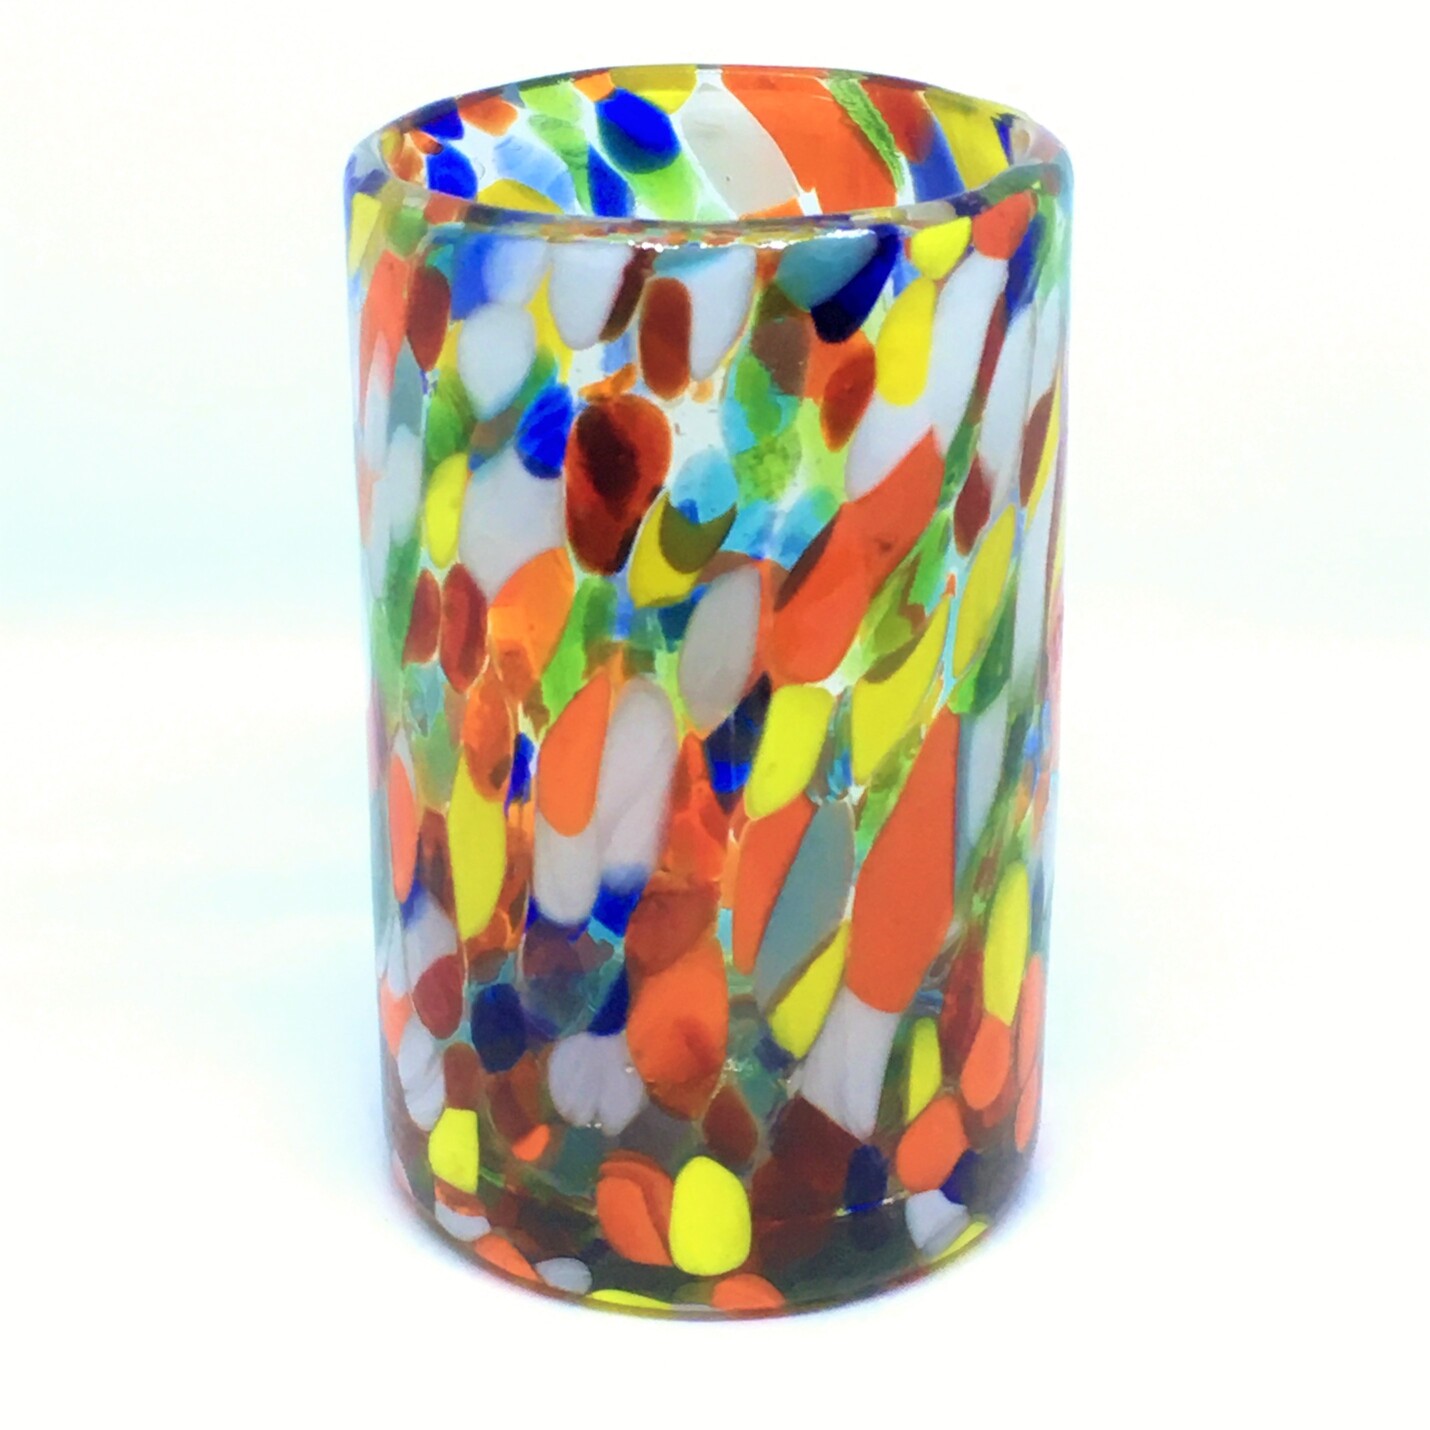 Confetti Glassware / Confetti Carnival 14 oz Drinking Glasses (set of 6) / Let the spring come into your home with this colorful set of glasses. The multicolor glass decoration makes them a standout in any place.